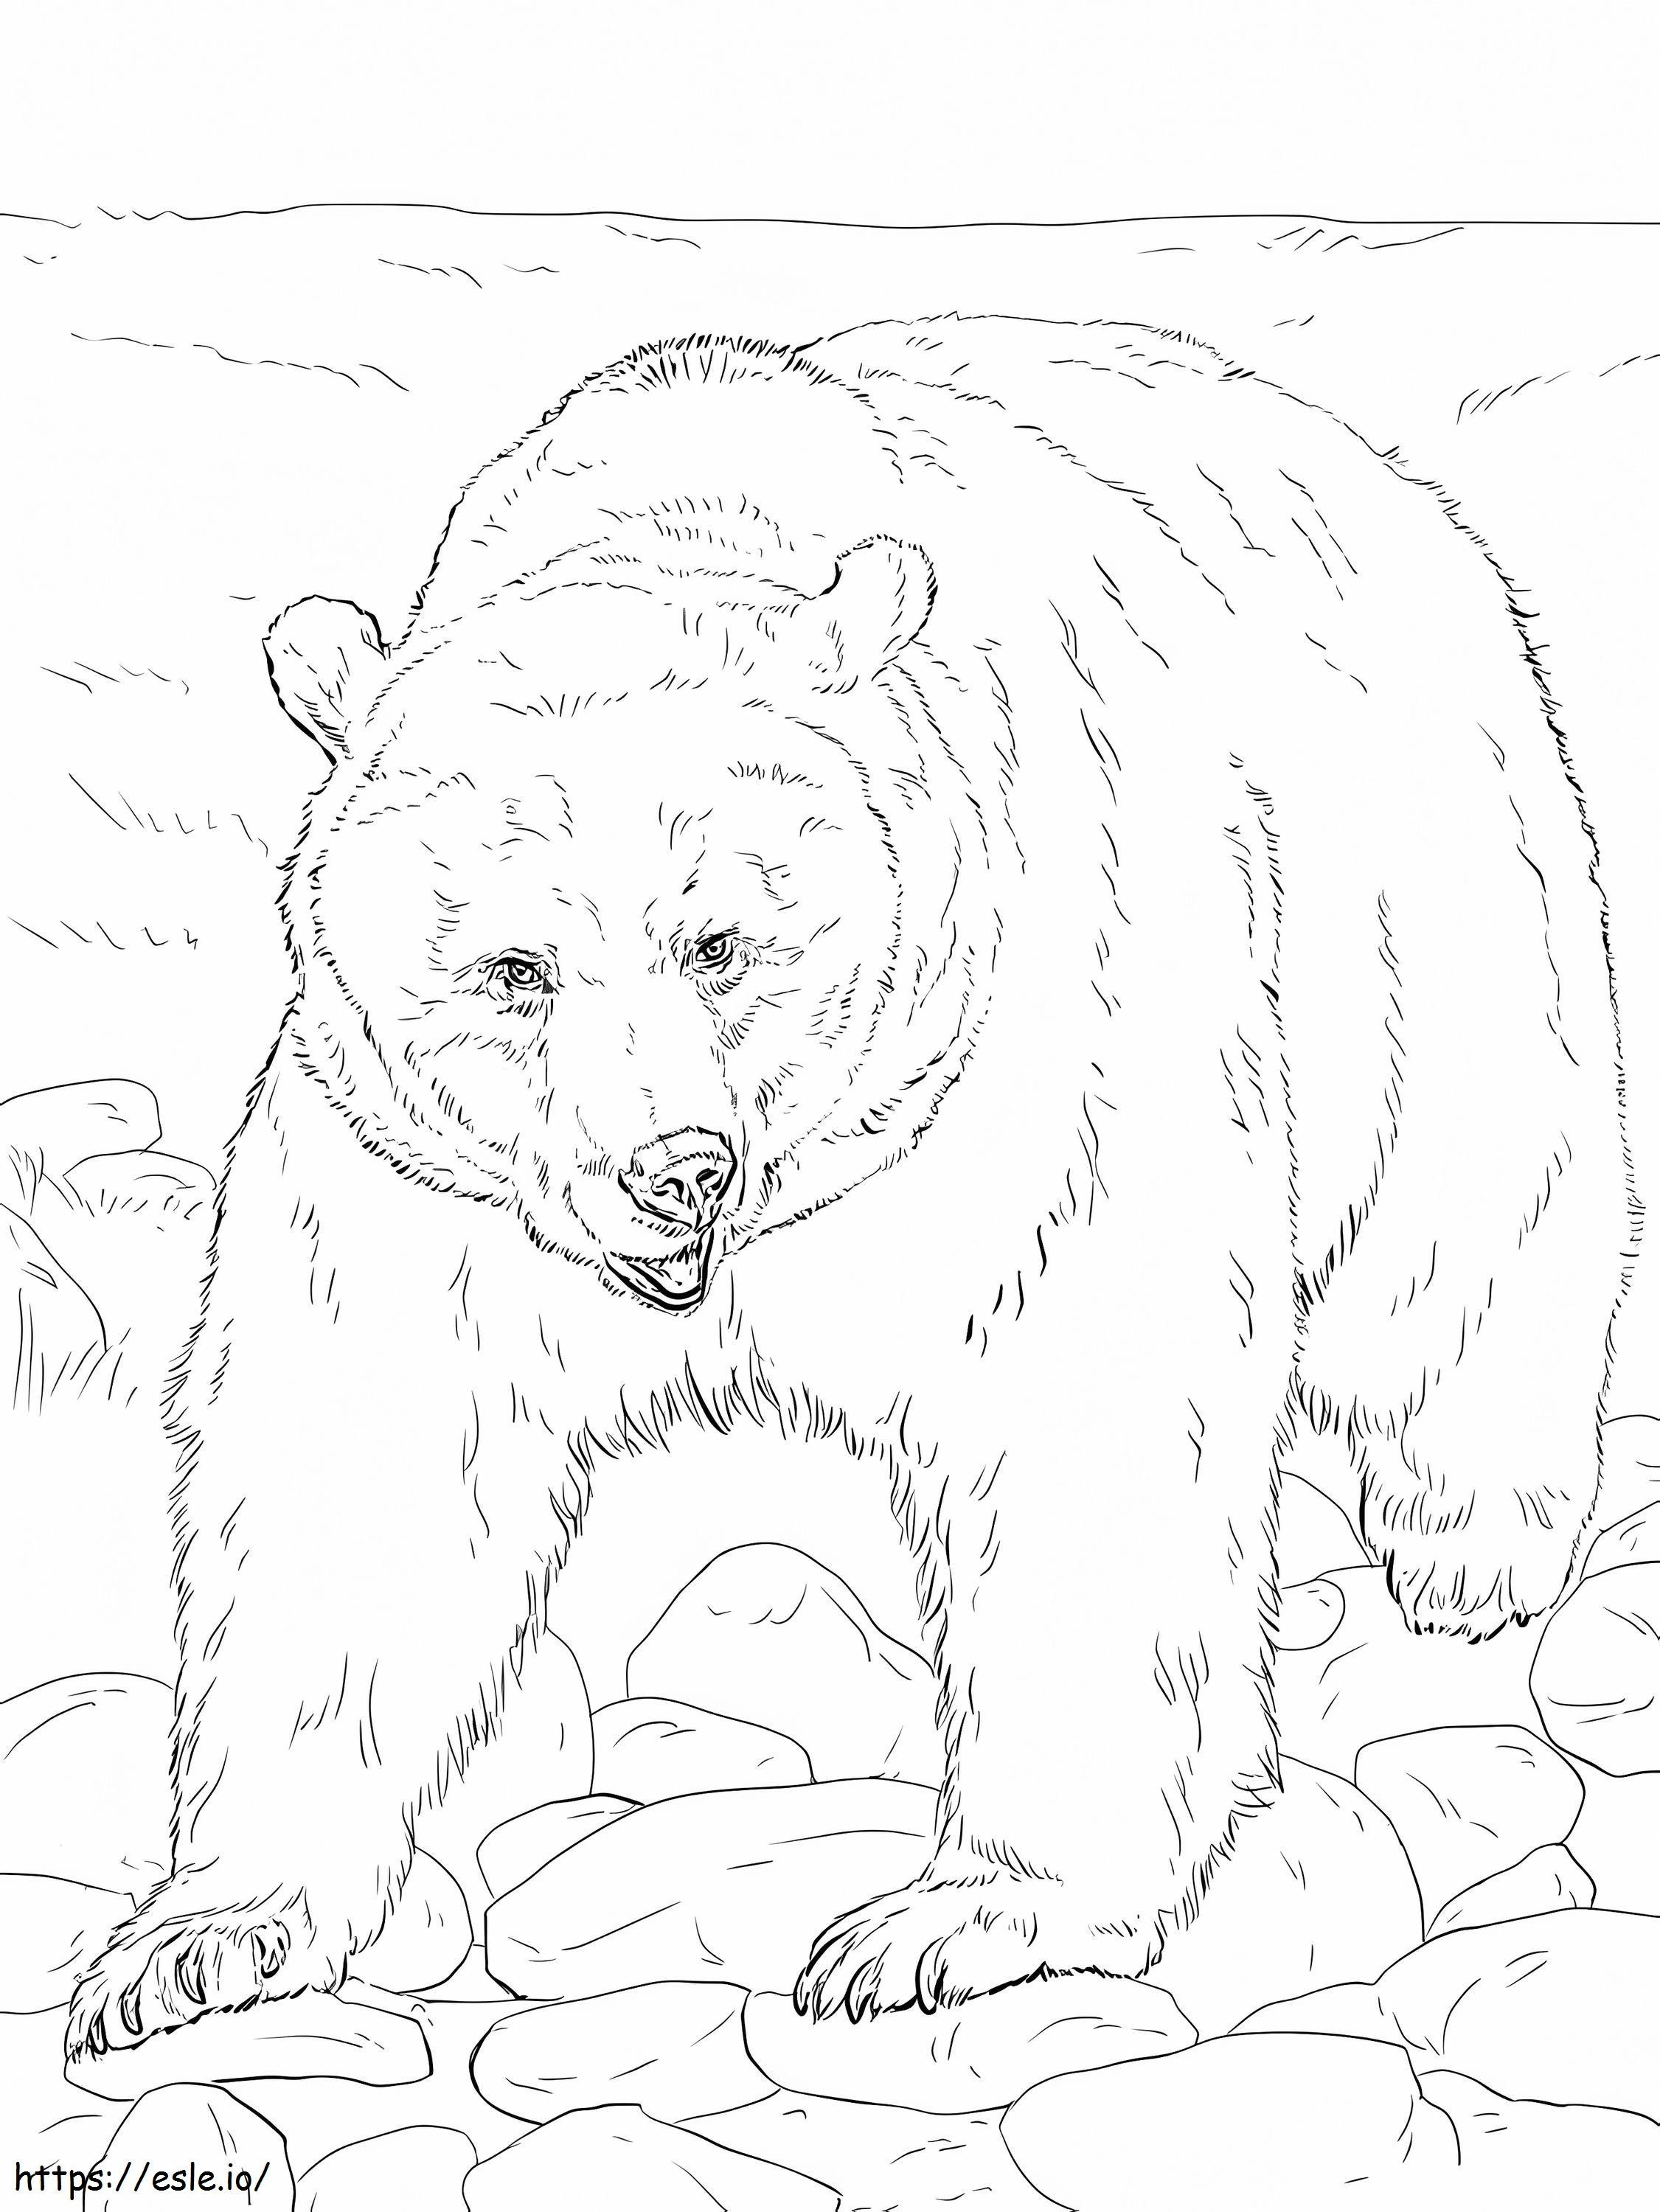 Brown Bear coloring page